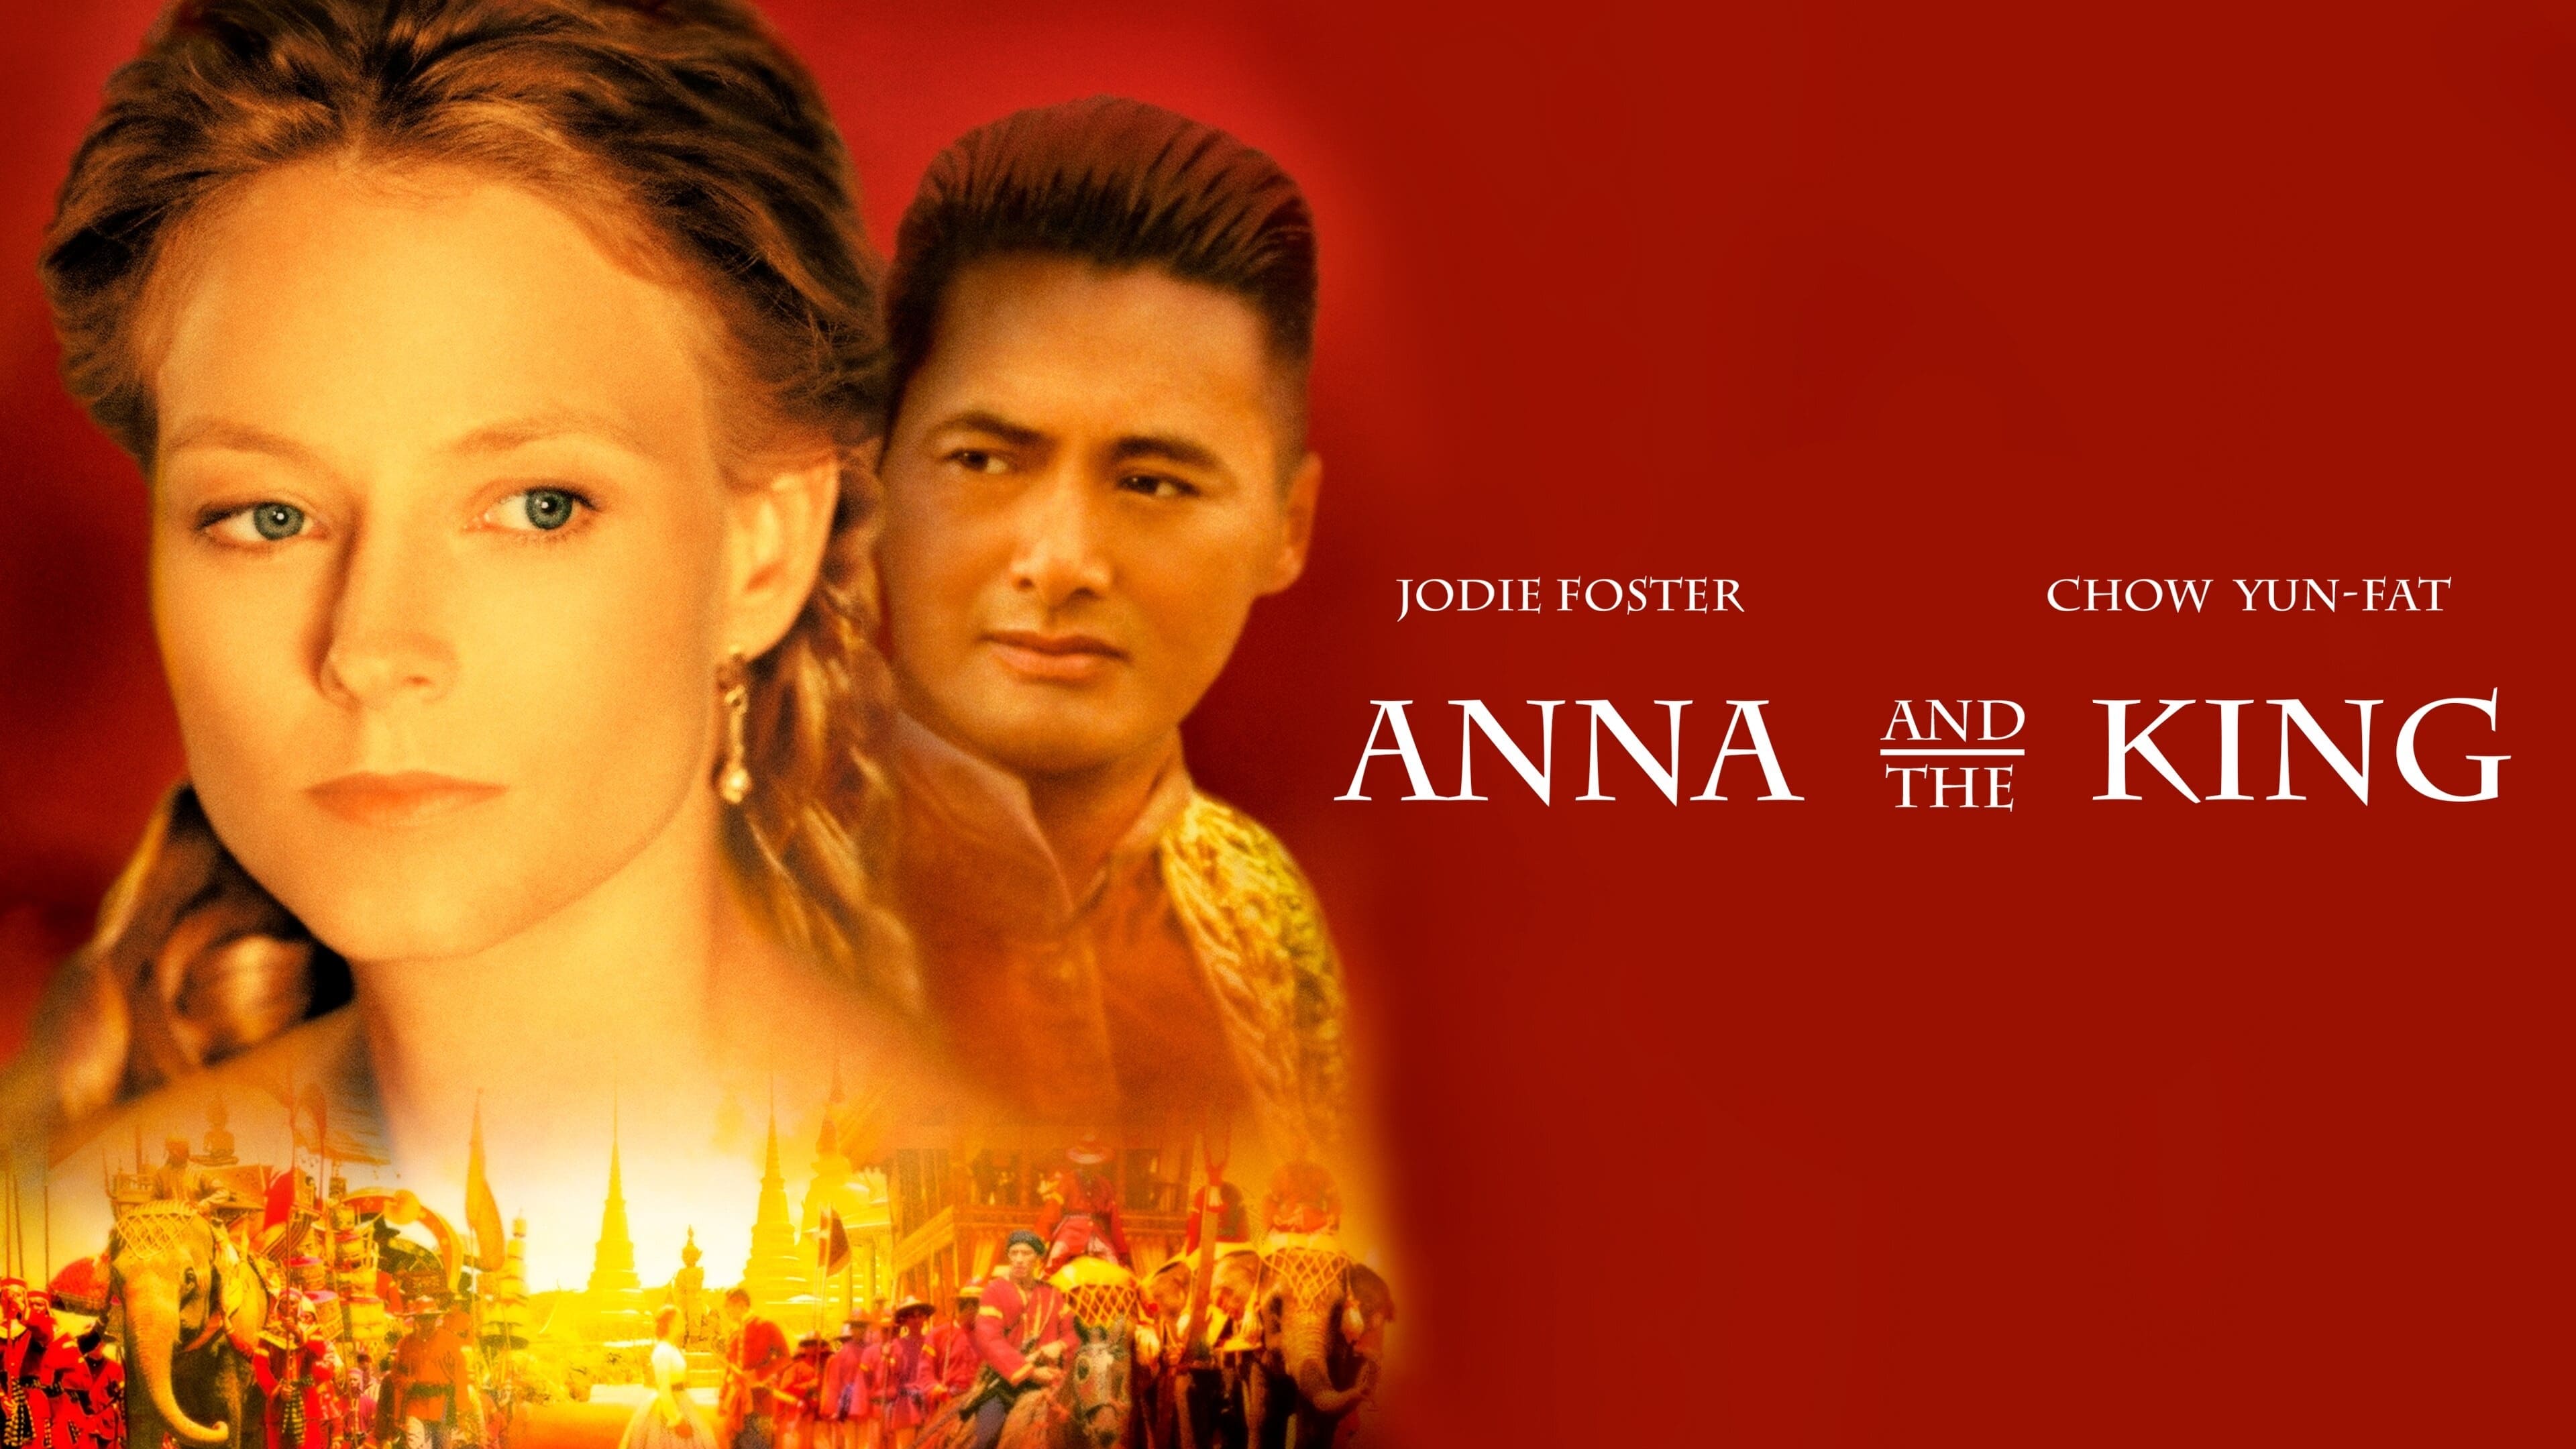 Anna and the King